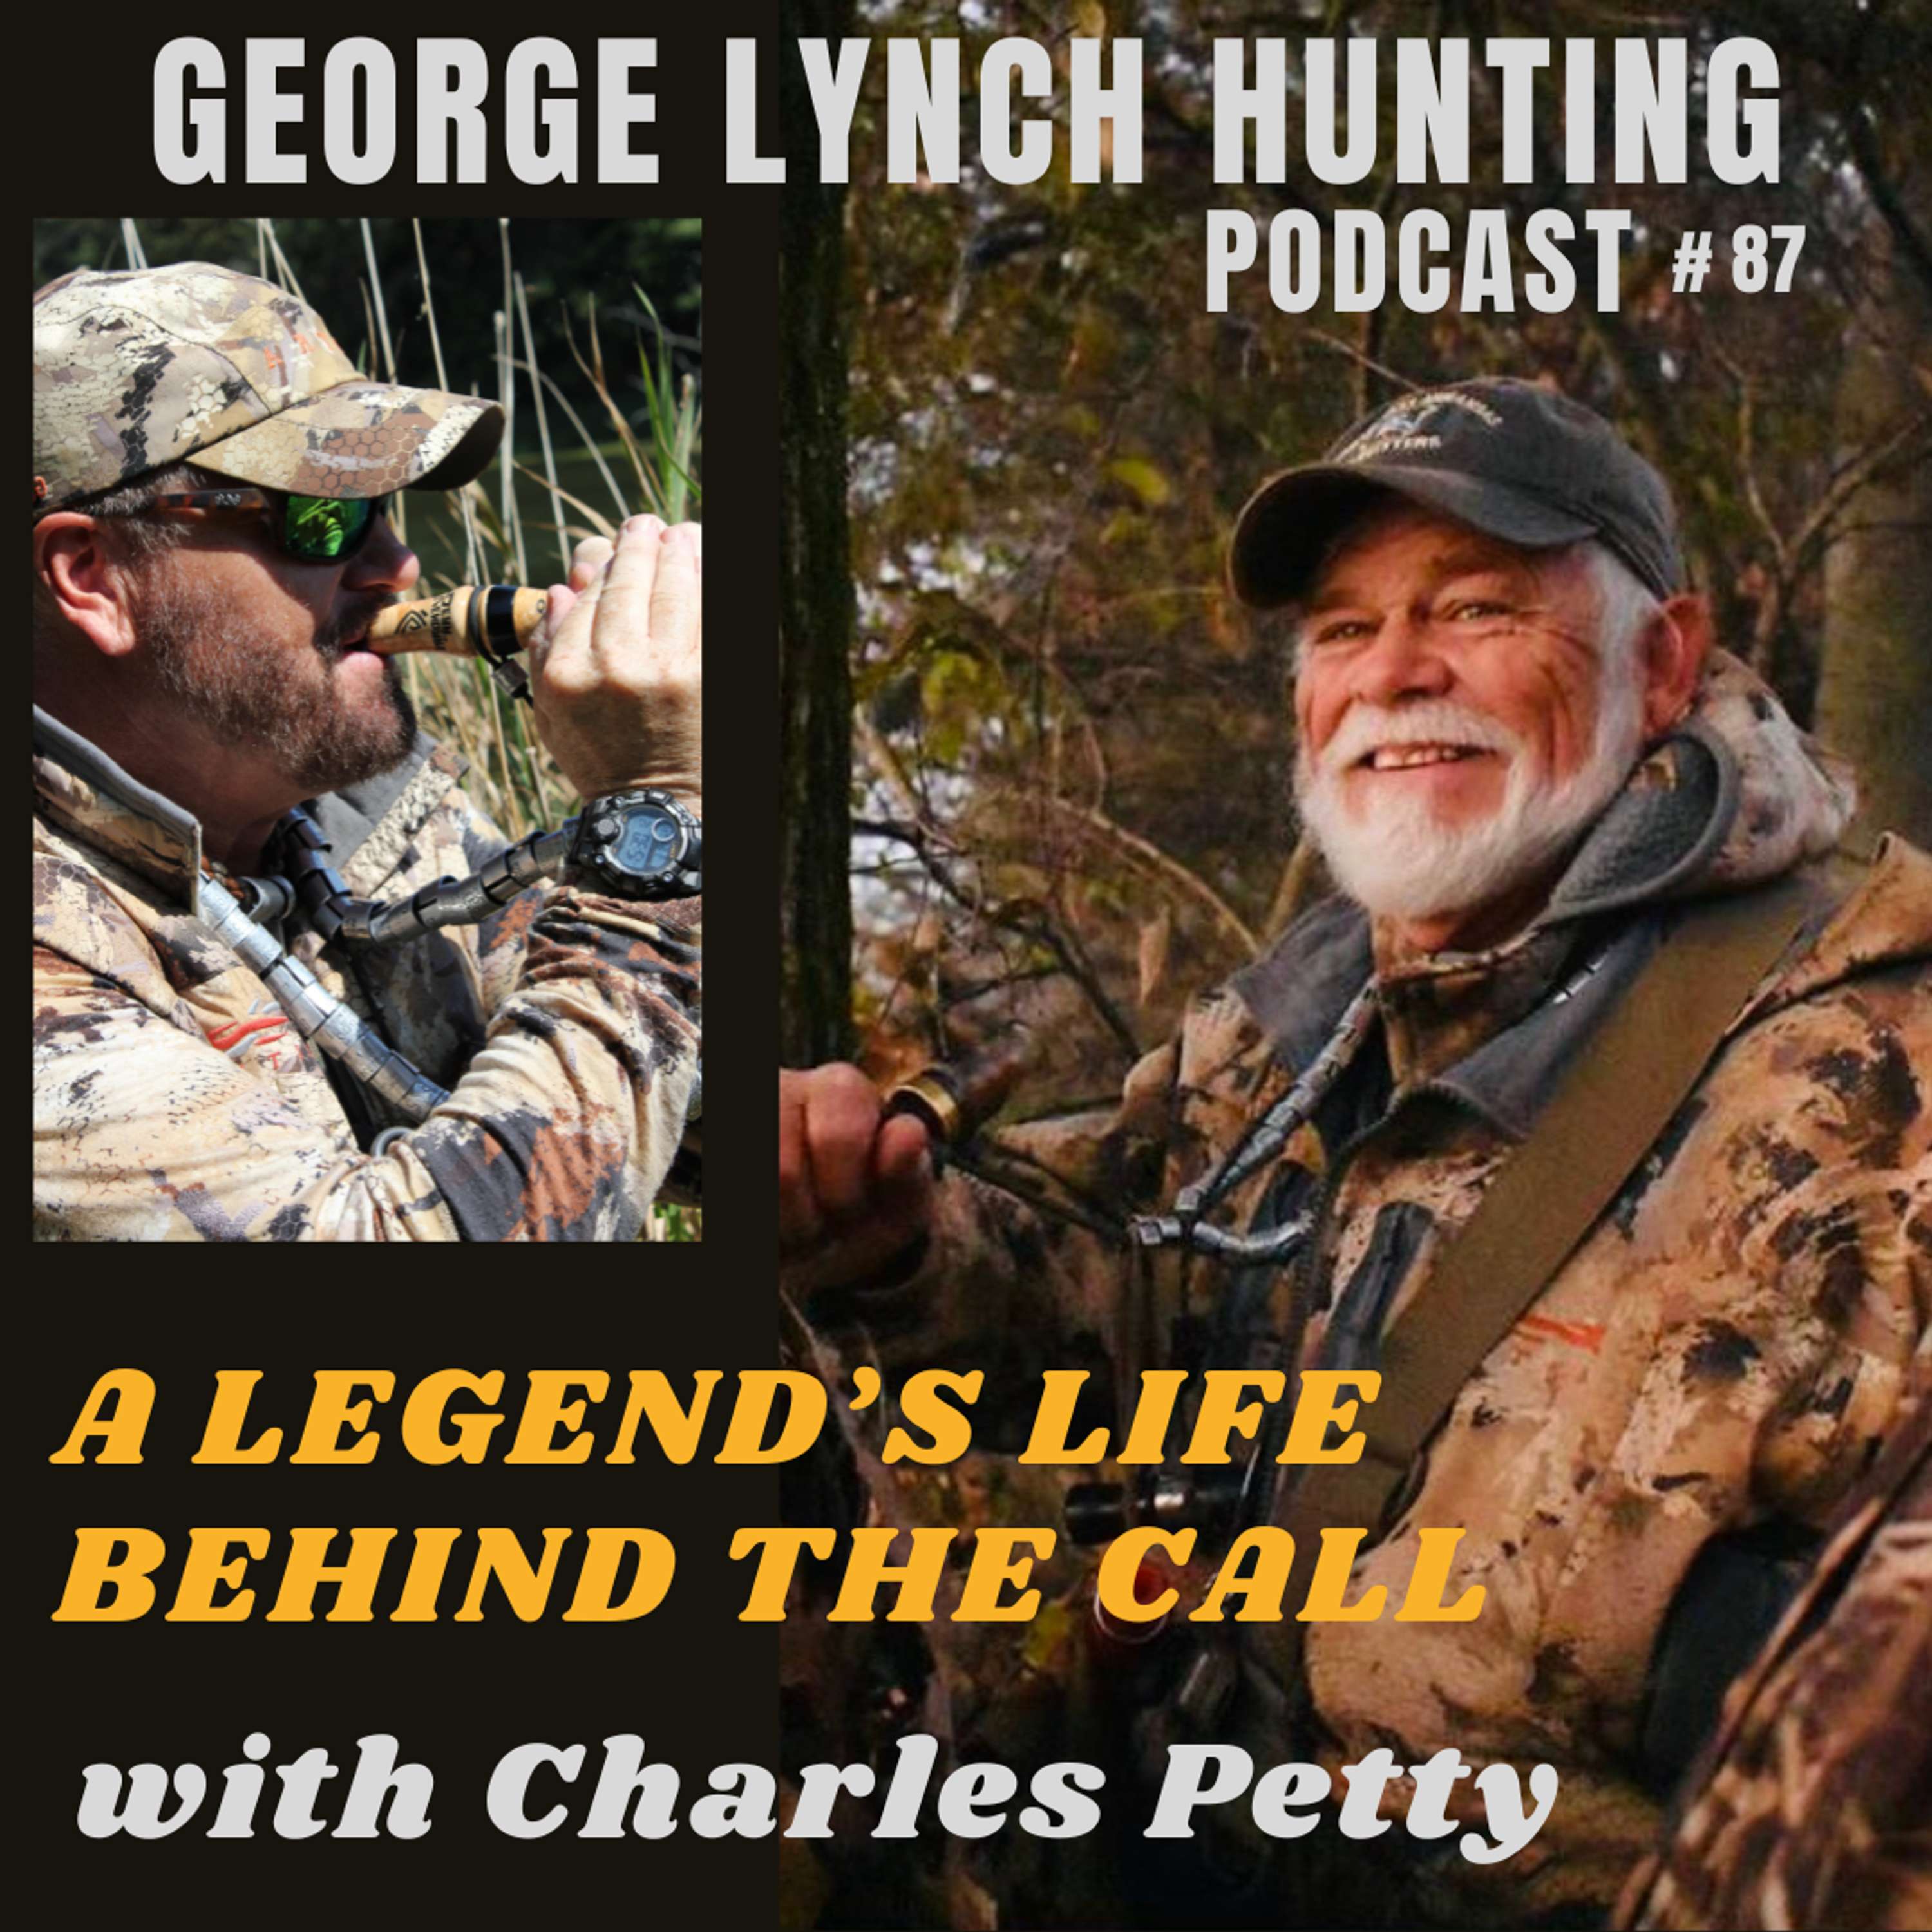 A LEGEND'S LIFE BEHIND THE CALL WITH CHARLES PETTY BY GEORGE LYNCH